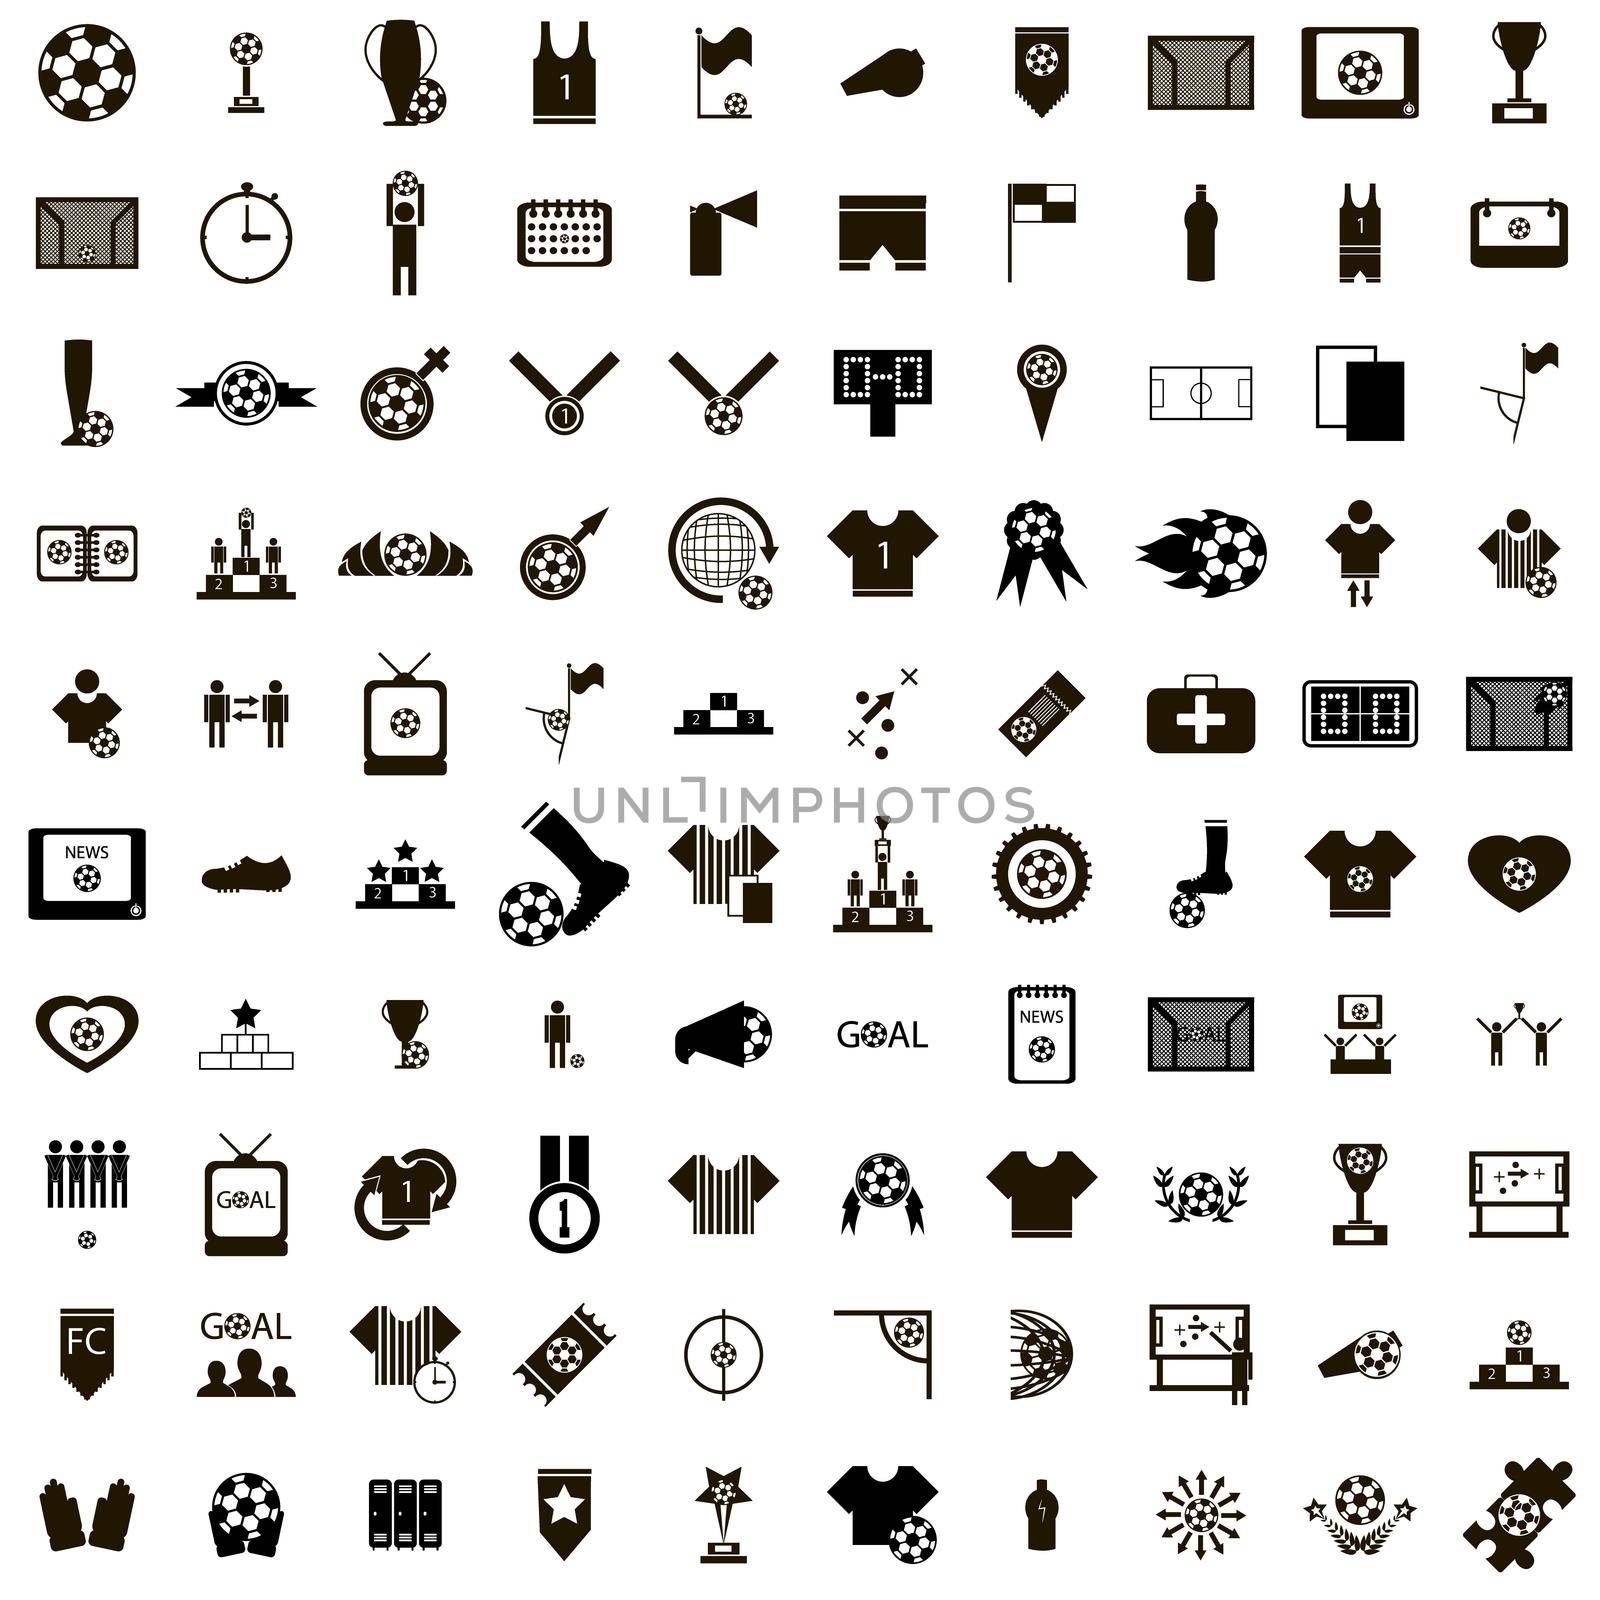 100 Soccer Icons set in simple style isolated on white background